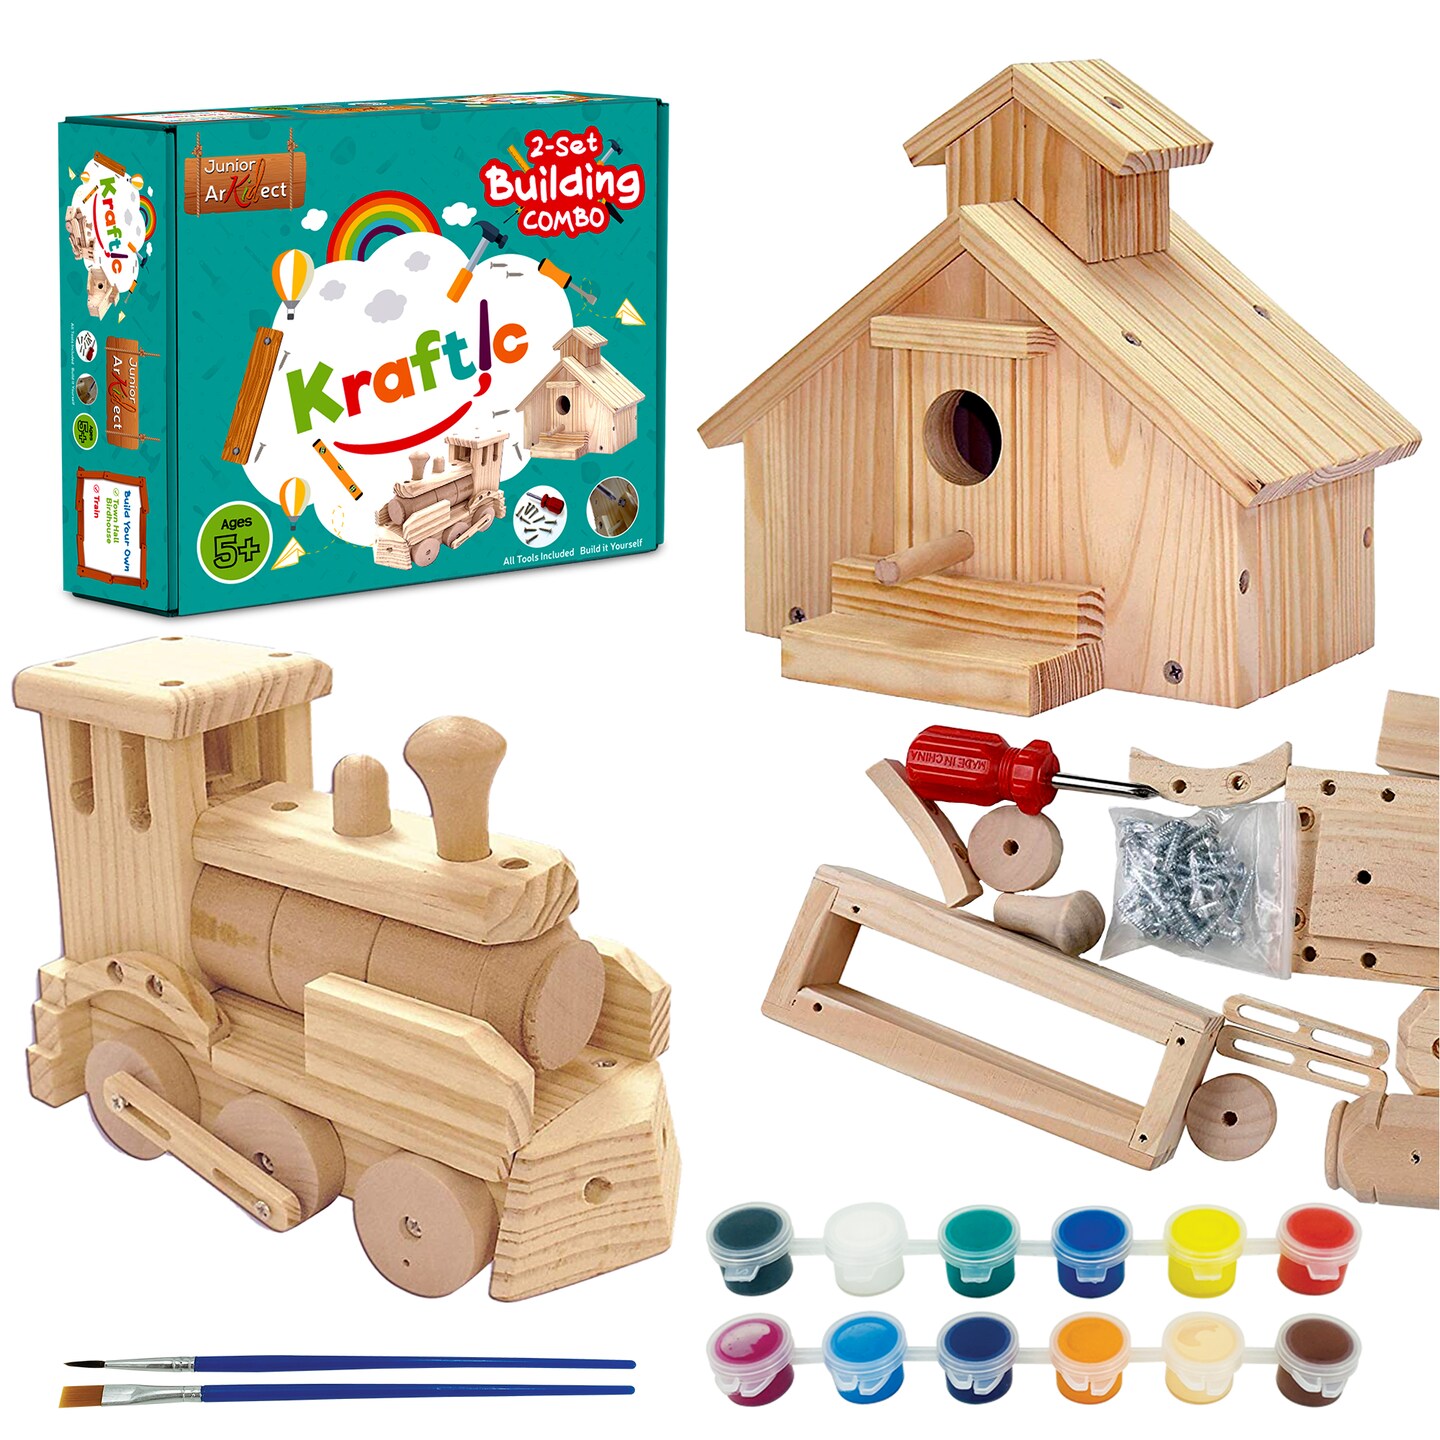 Kraftic Woodworking Building Kit for Kids and Adults, 2